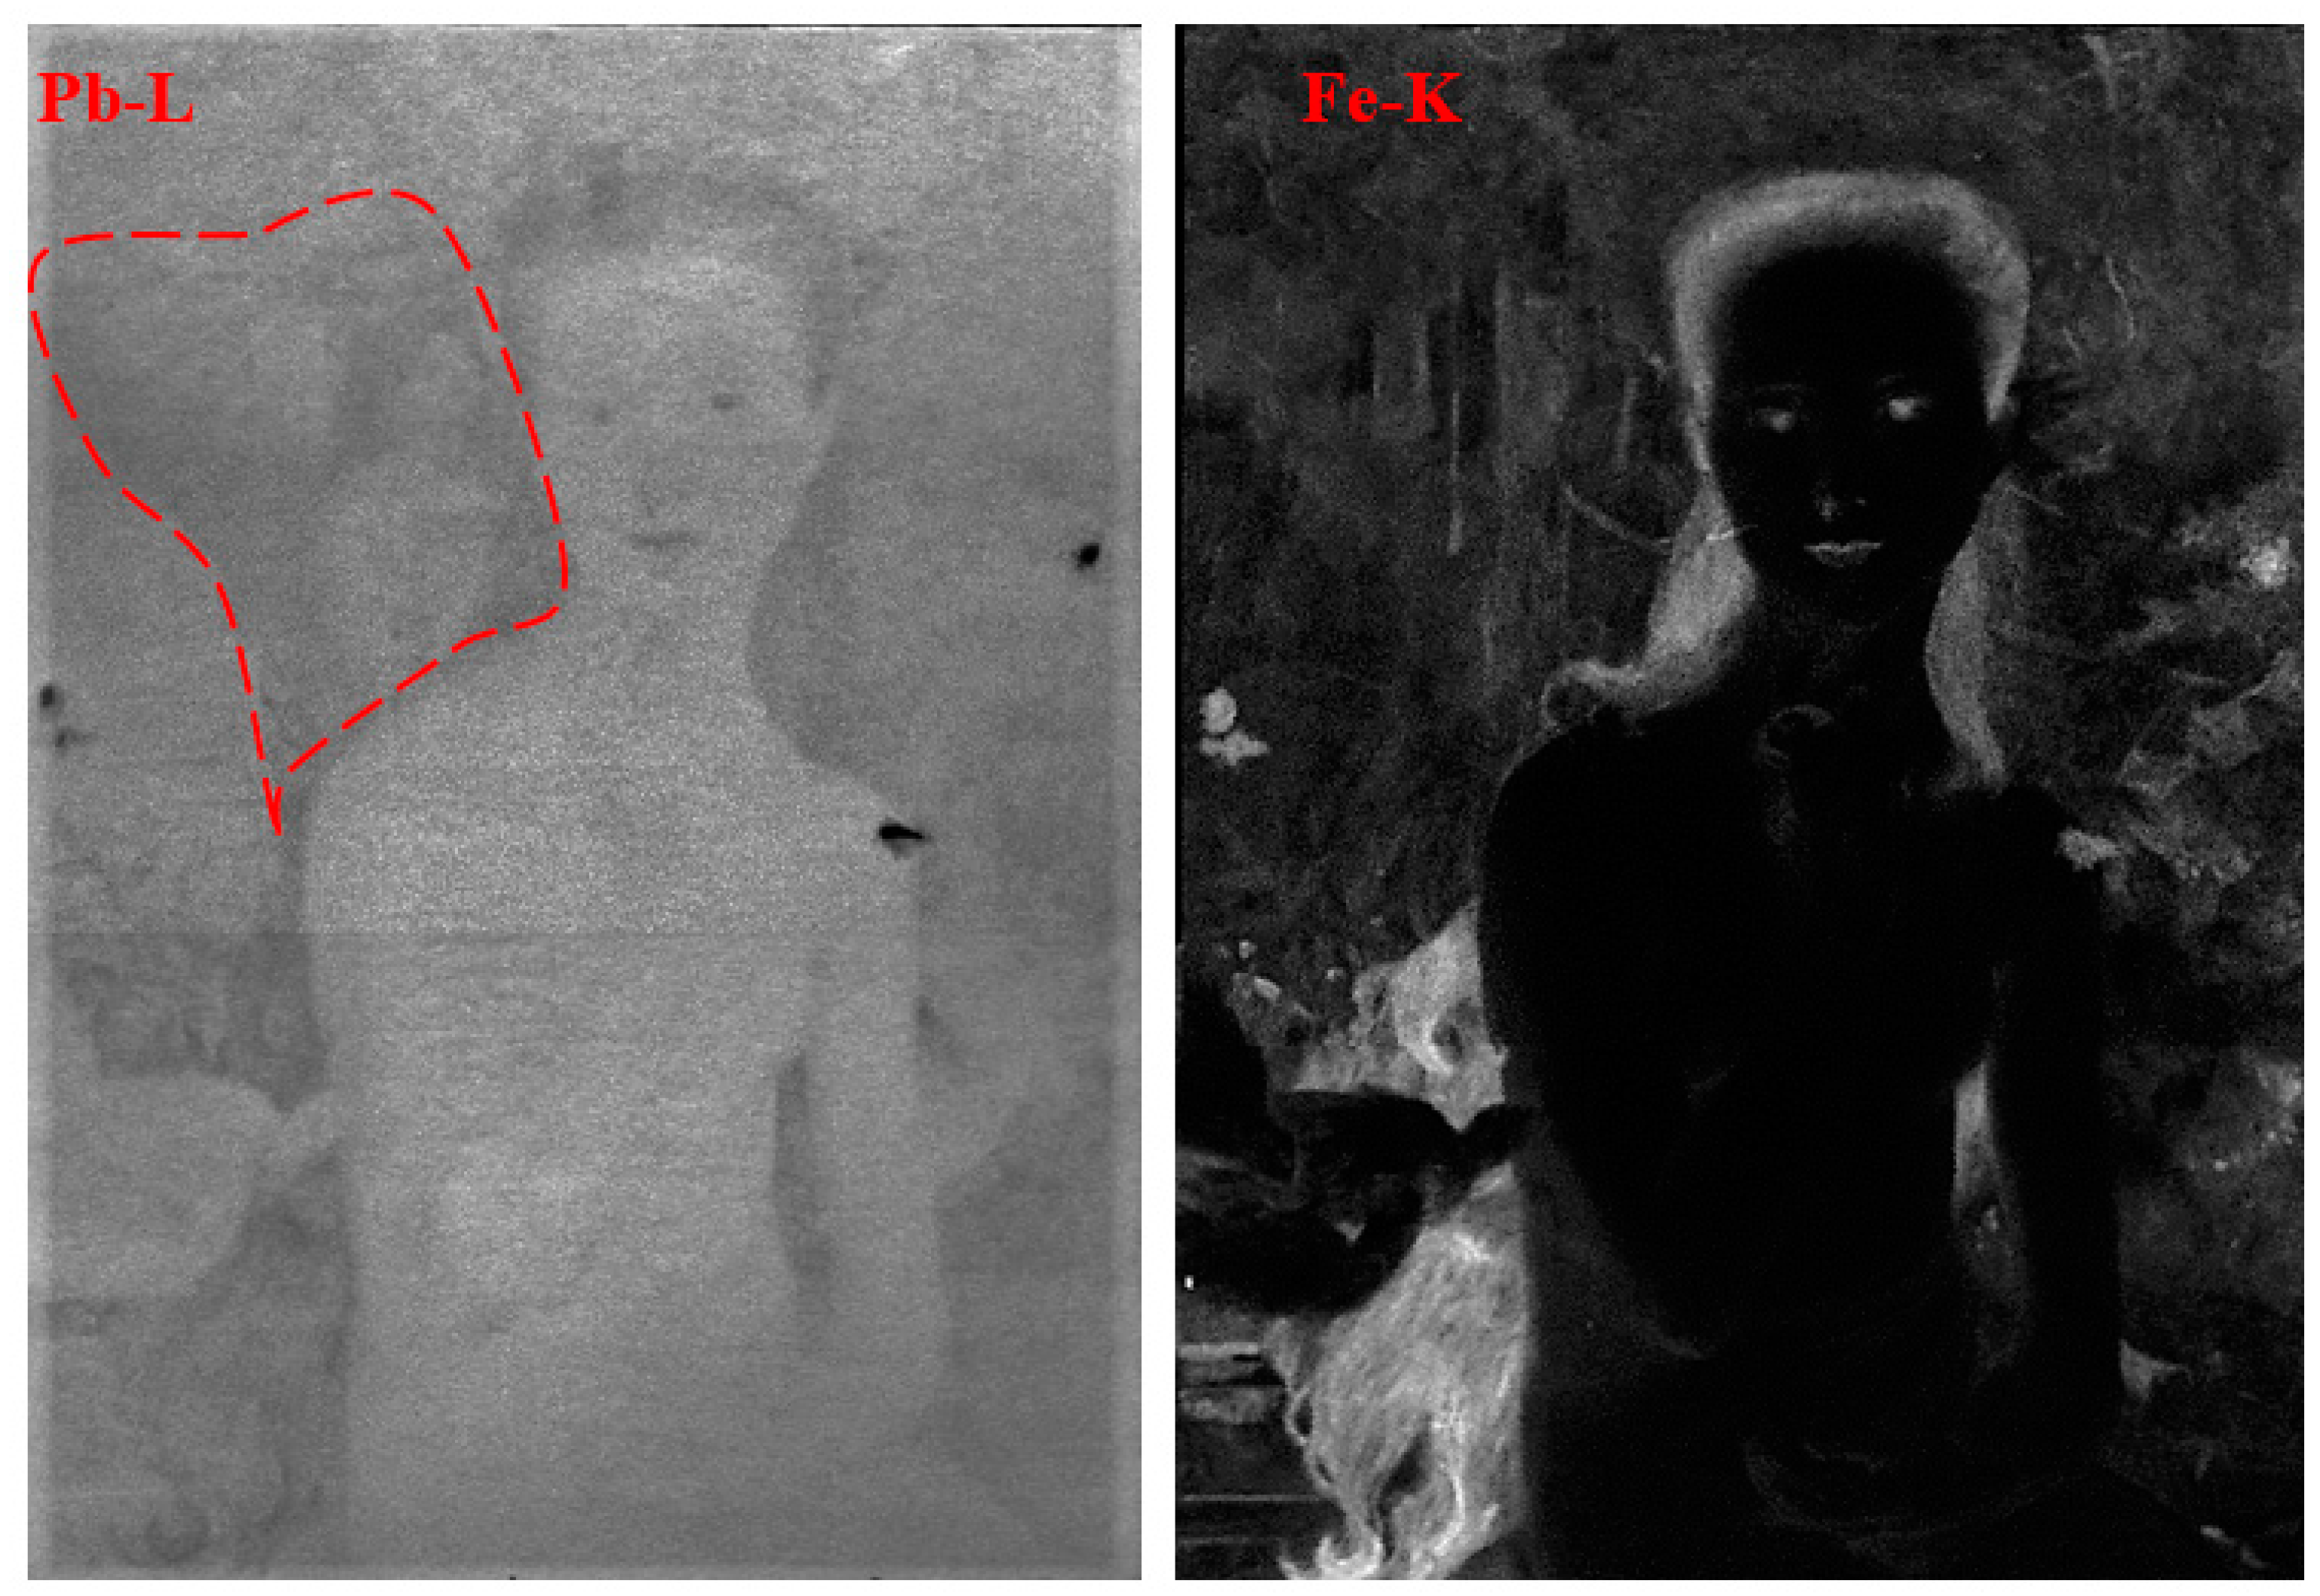 PDF) Investigating Brazilian Paintings from the 19th Century by MA-XRF